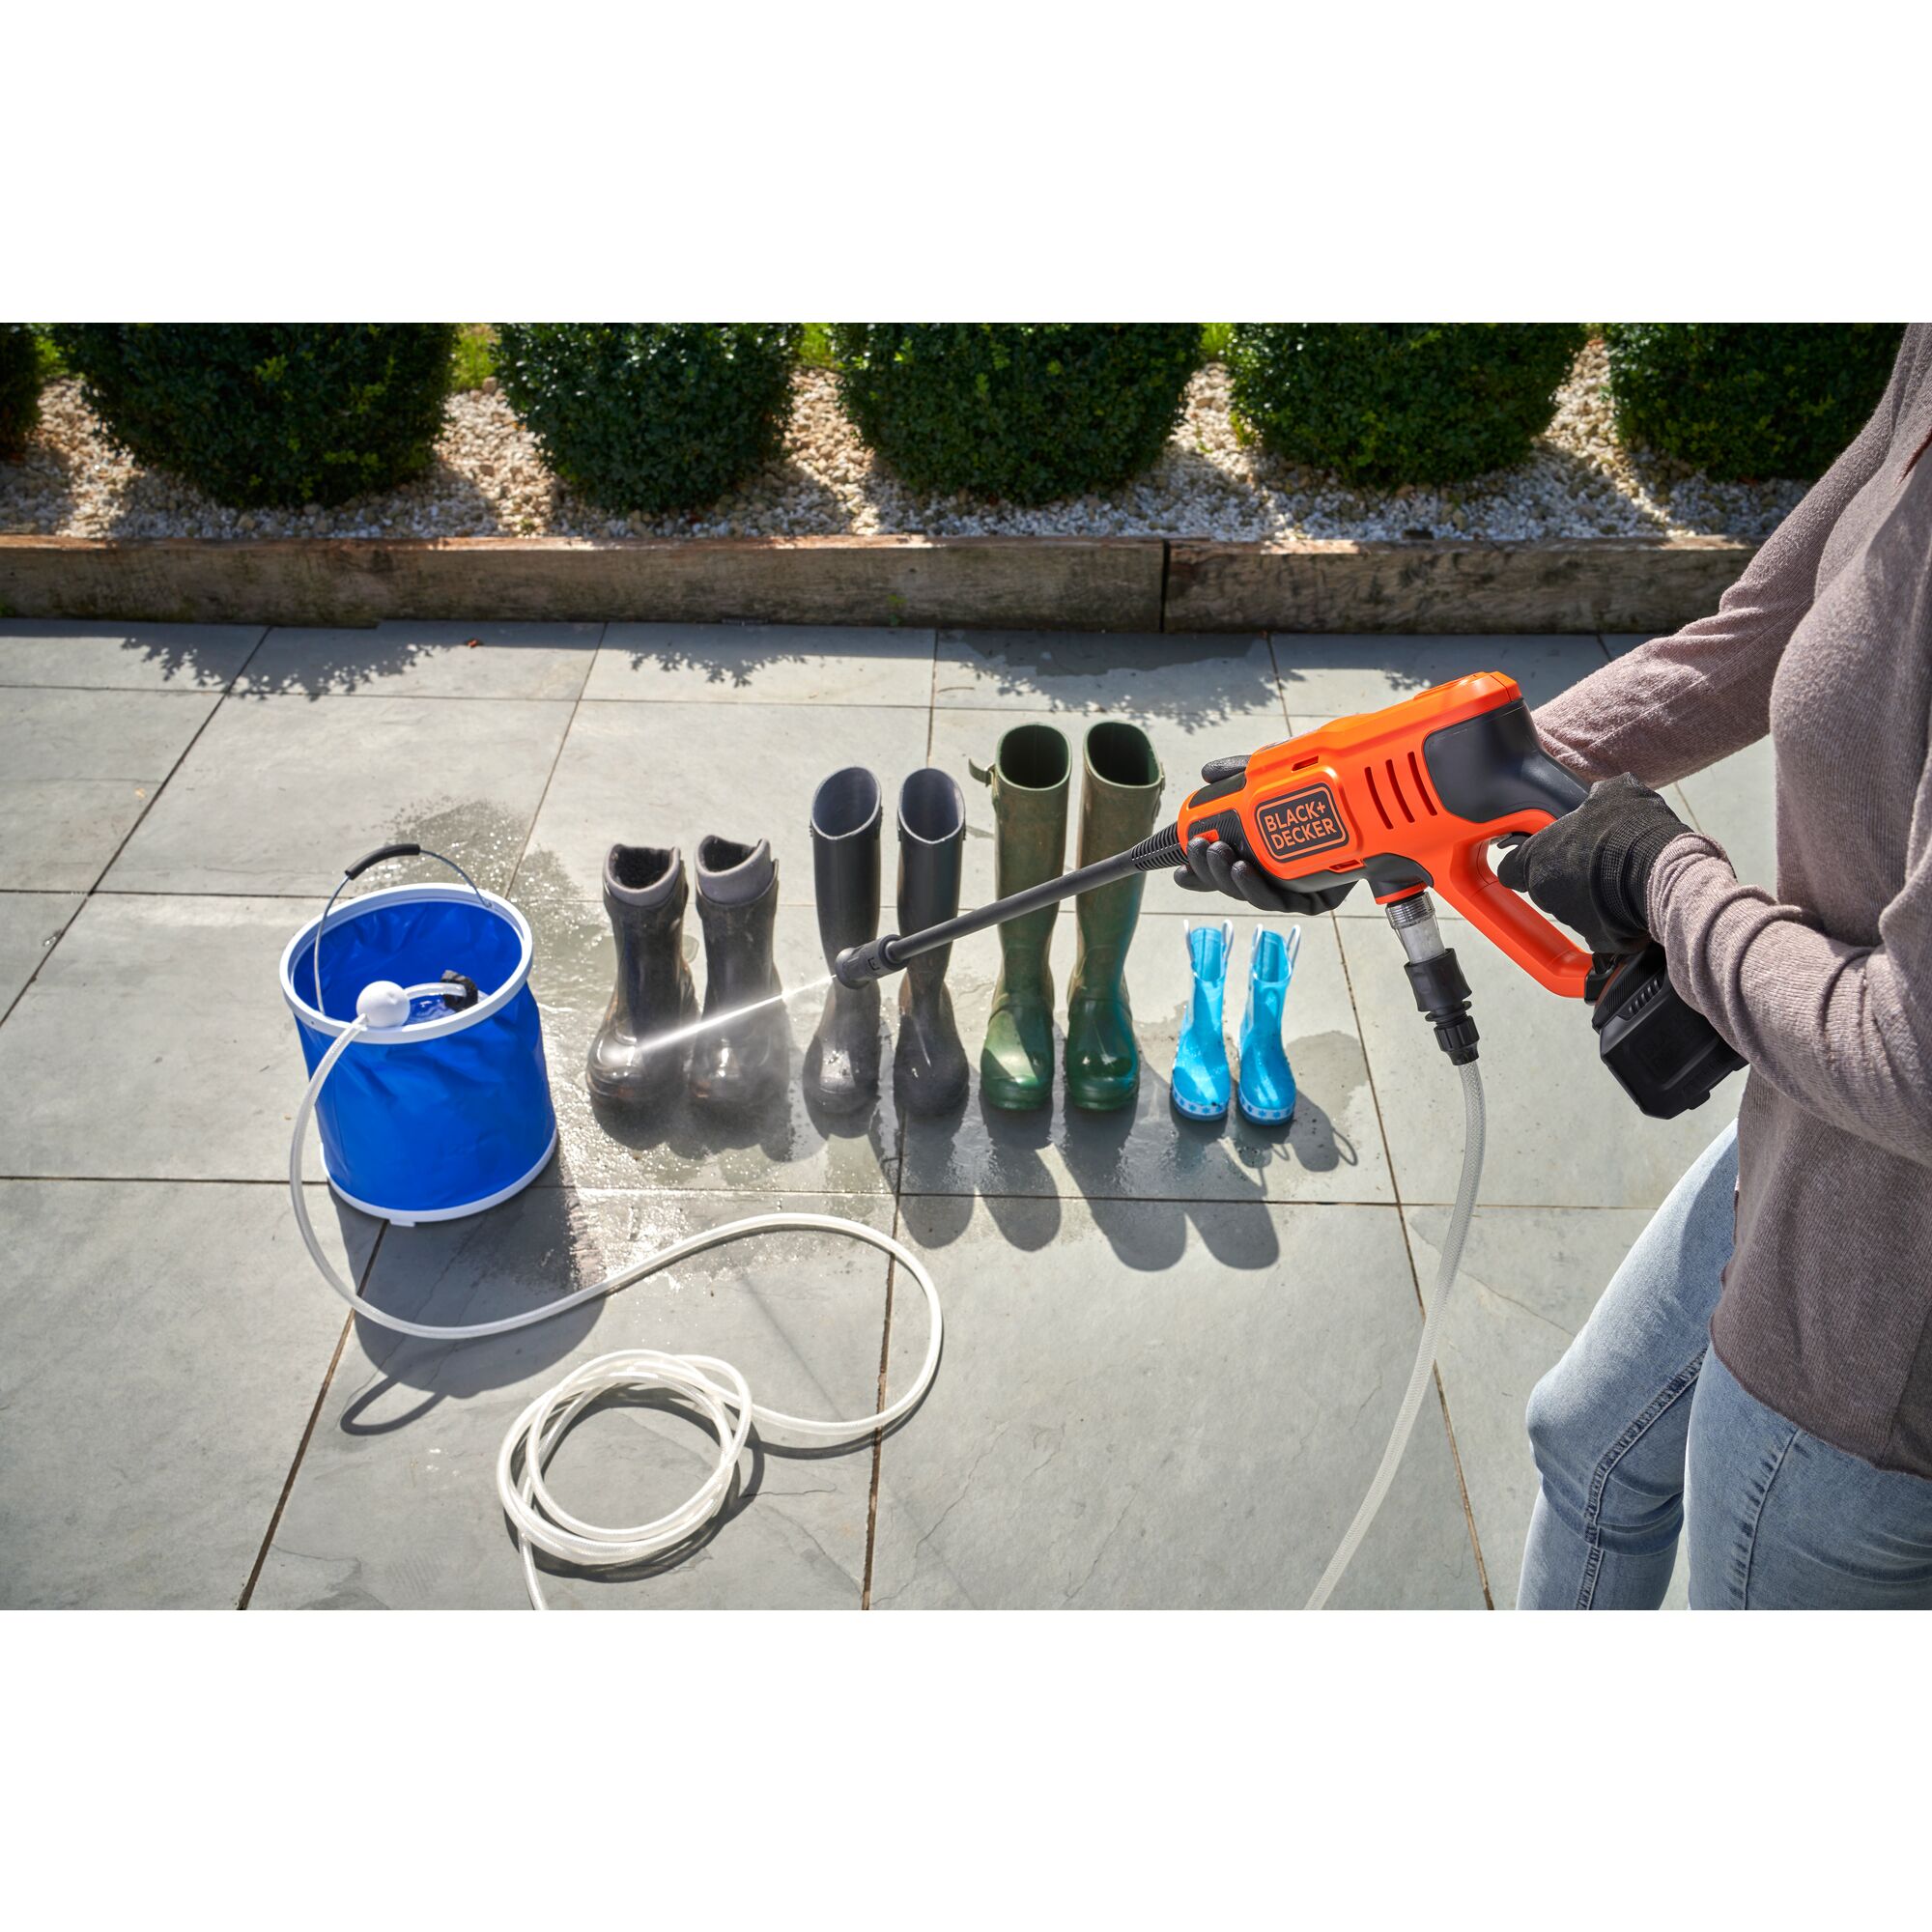 20 Volt Cordless Power Cleaner Kit being used on garden boots.